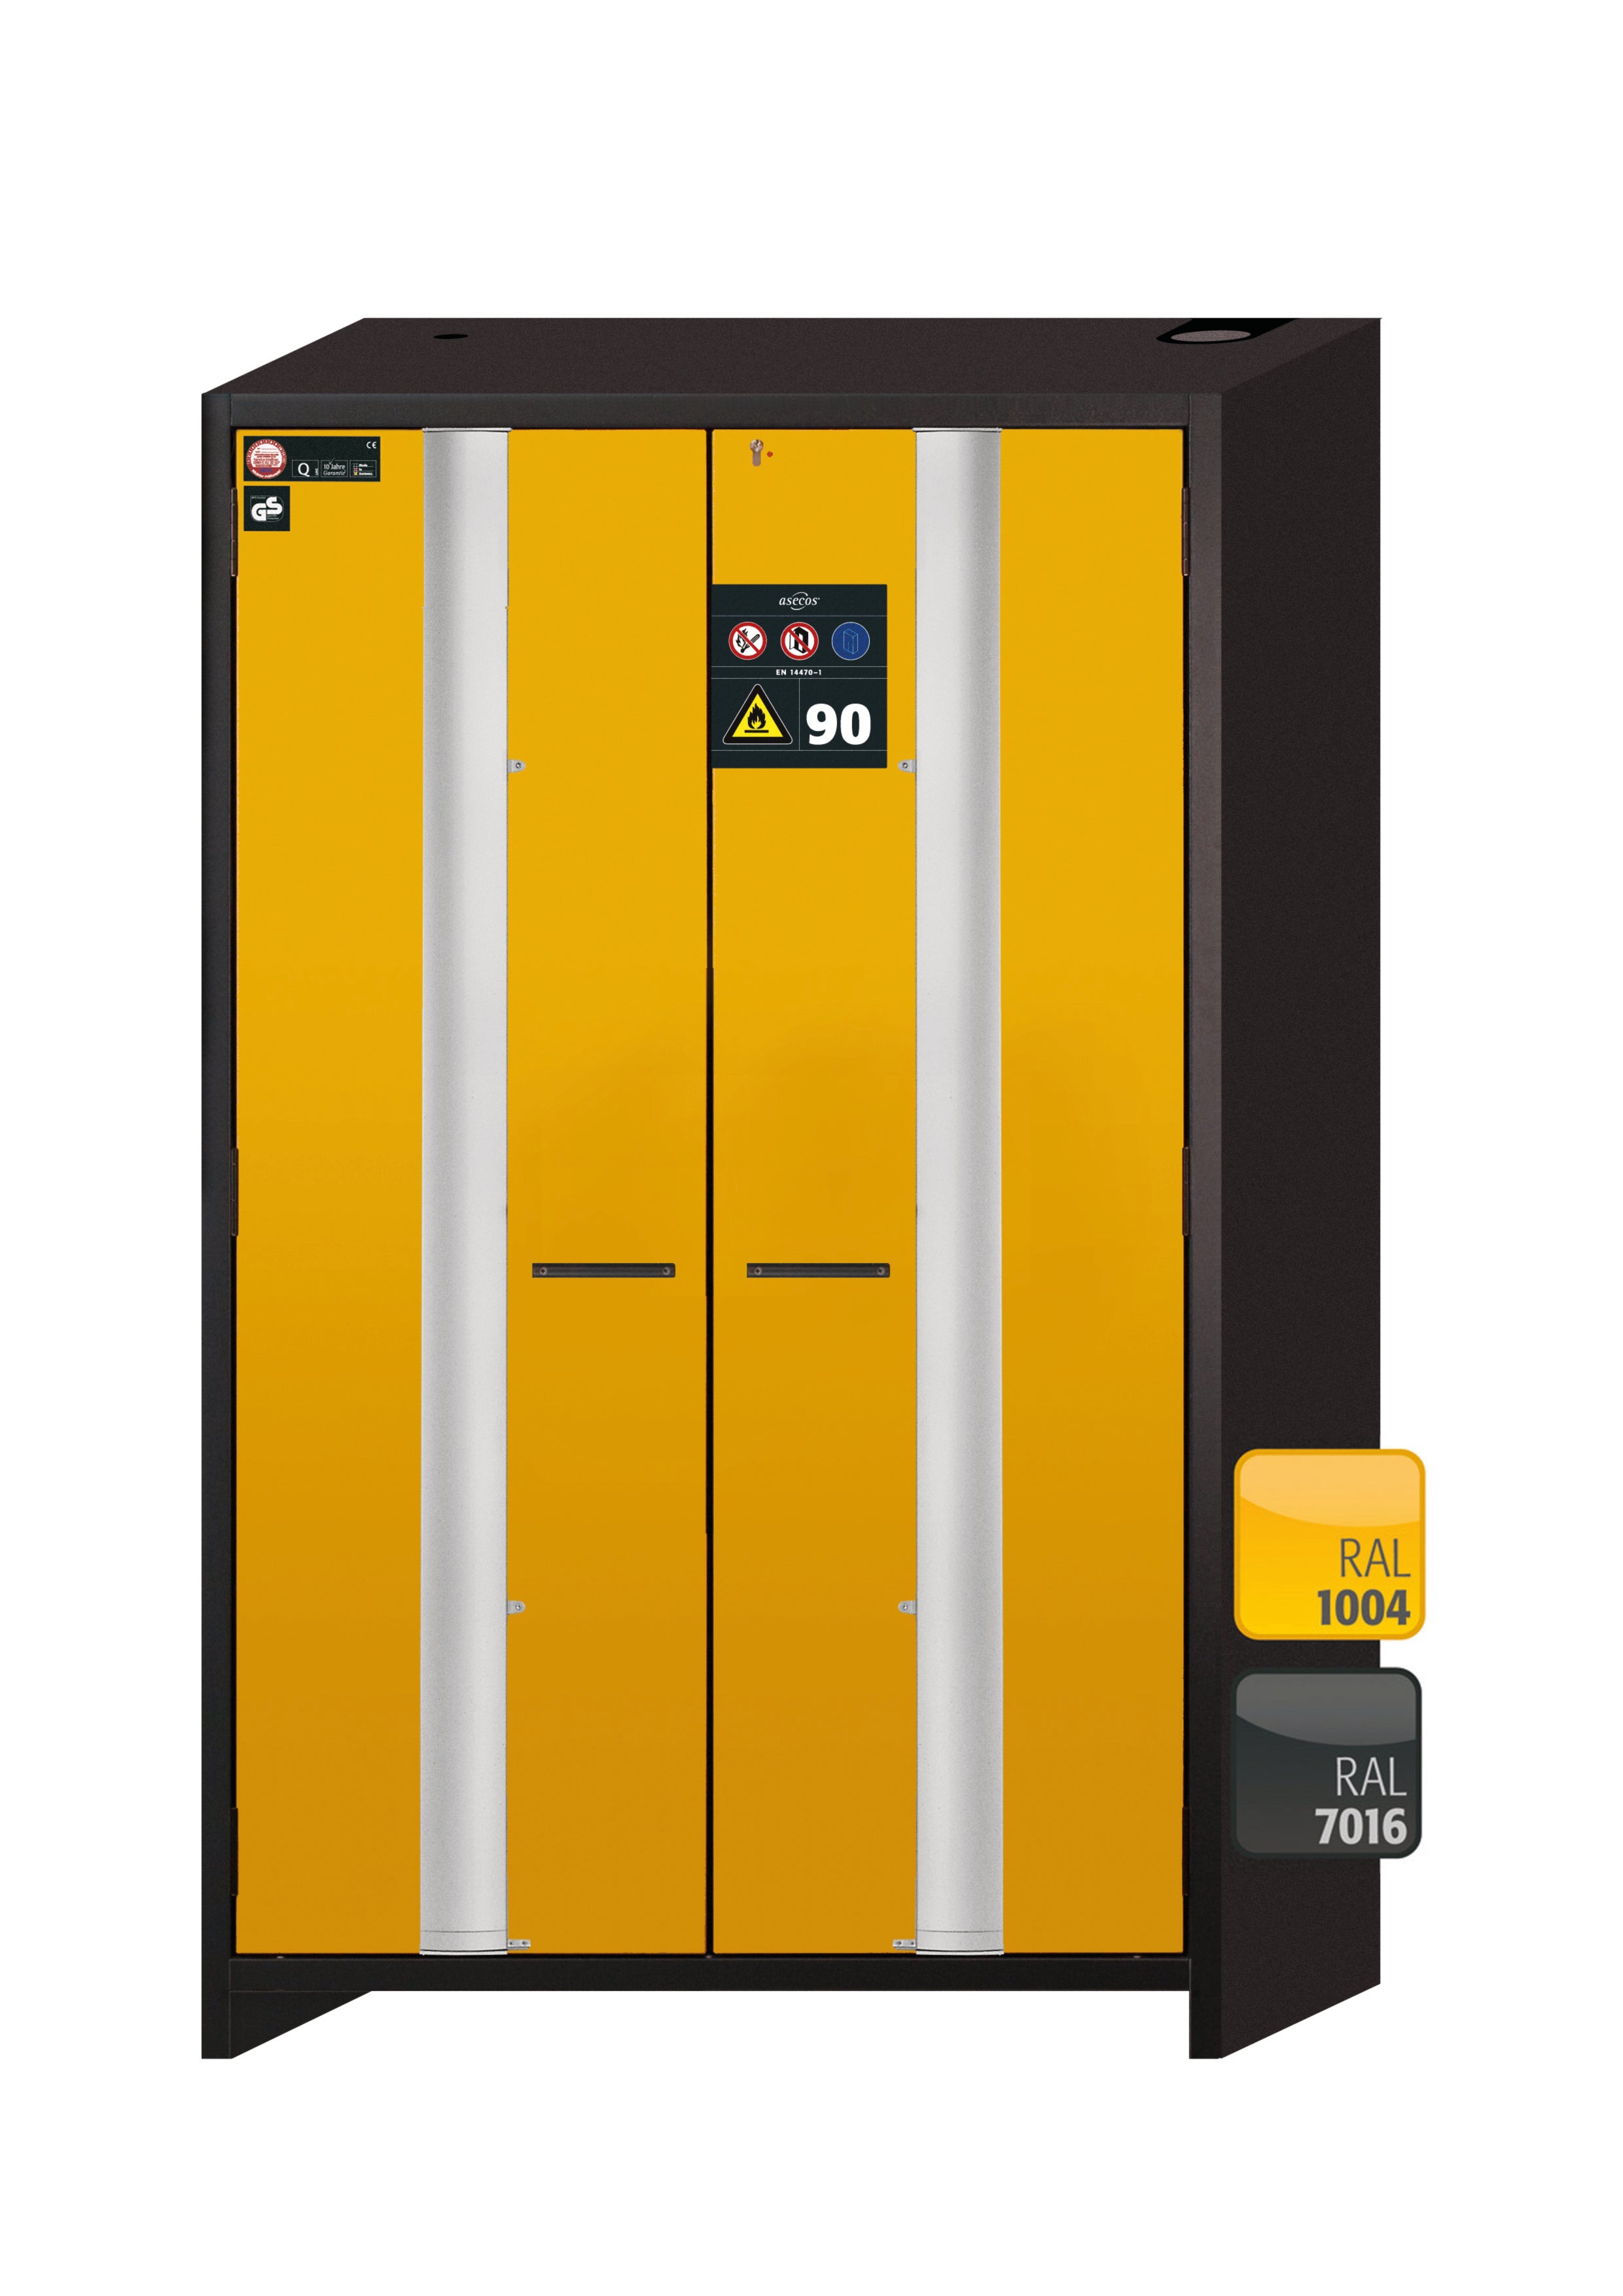 Type 90 safety cabinet Q-PHOENIX-90 model Q90.195.120.FD in safety yellow RAL 1004 with 2x standard tray base (sheet steel)